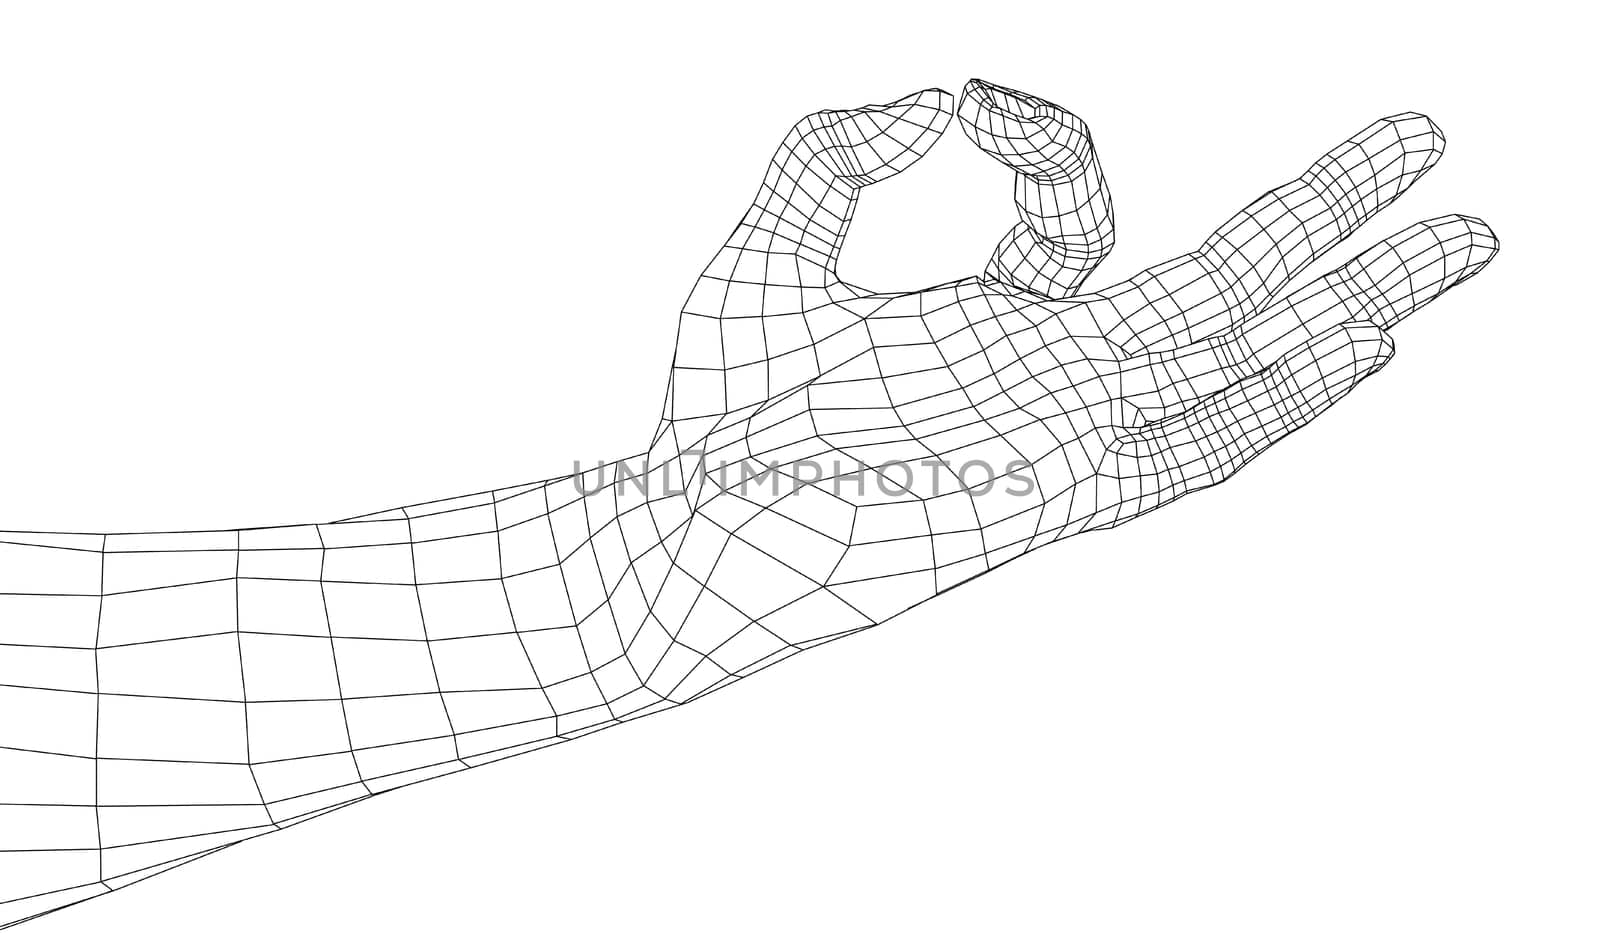 Hand OK sign. 3d illustration. Wire-frame style